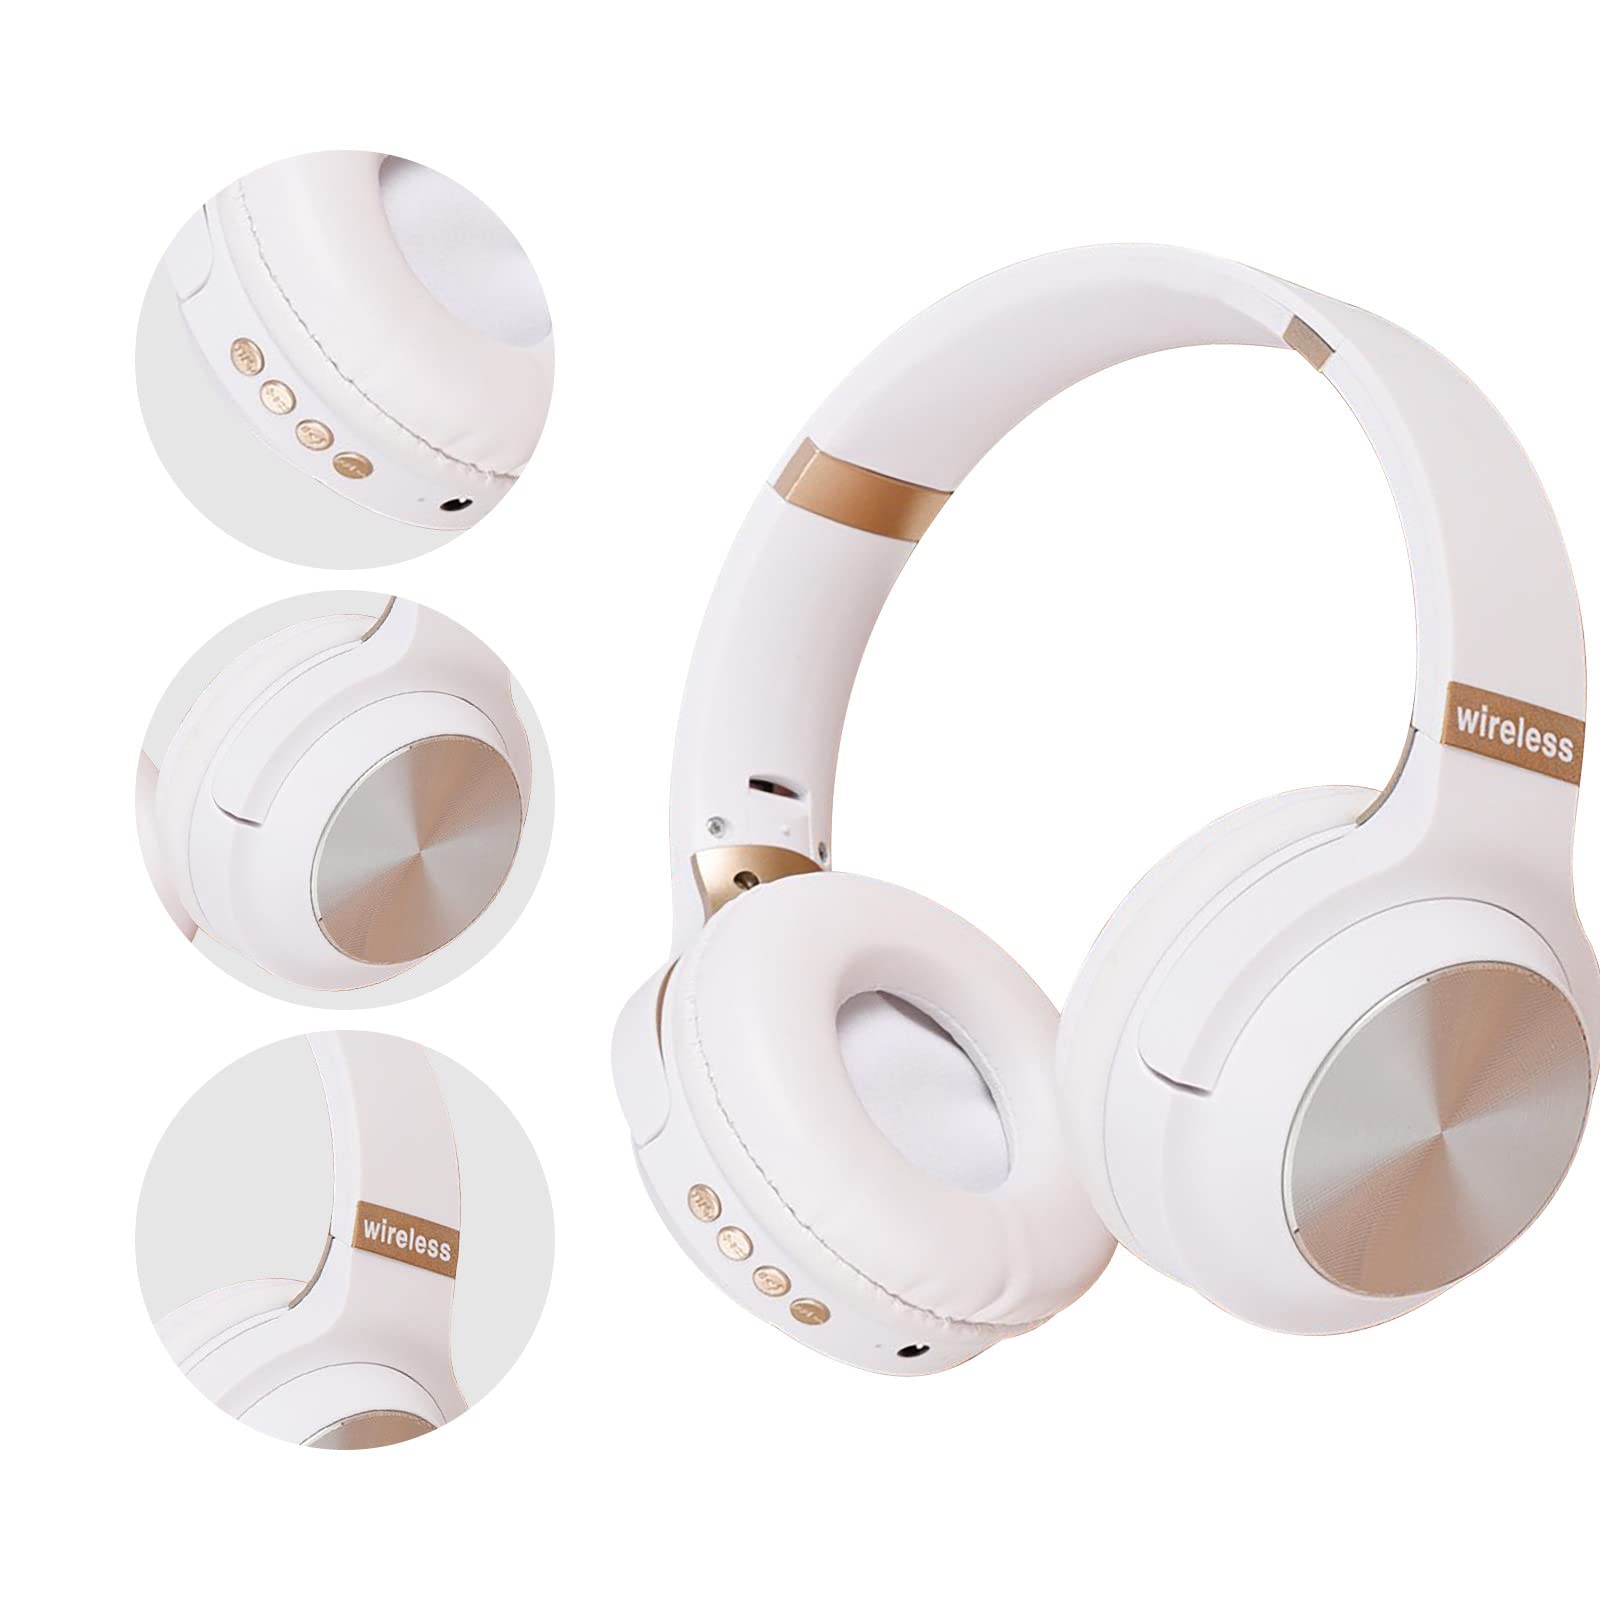 VKEKIEO Bluetooth Over-Ear Headphones, Wireless/Wired Foldable Headsets with FM Pluggable Card, Stereo Sound Headphones Allow to Adjust The Wearing Size for Travel Work (White)